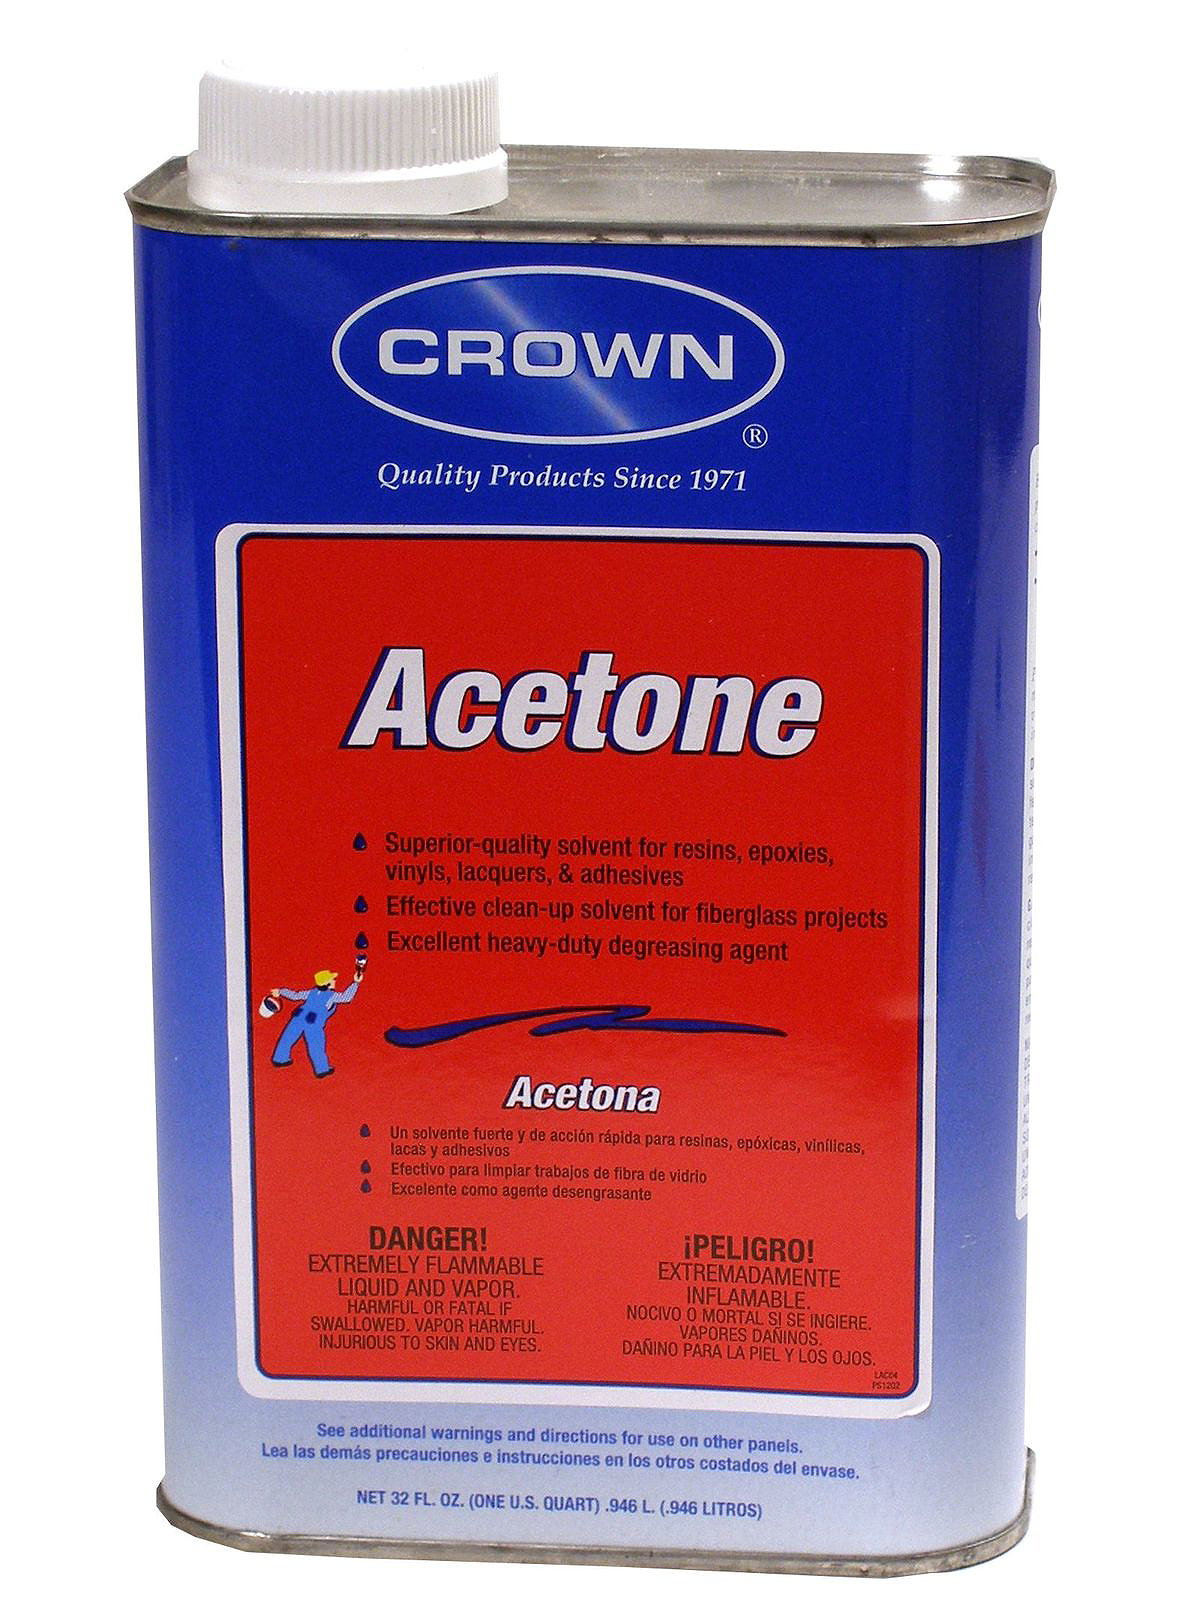 ACETONE 99.7%, Fast Drying Solvent for Thinner and Cleaner